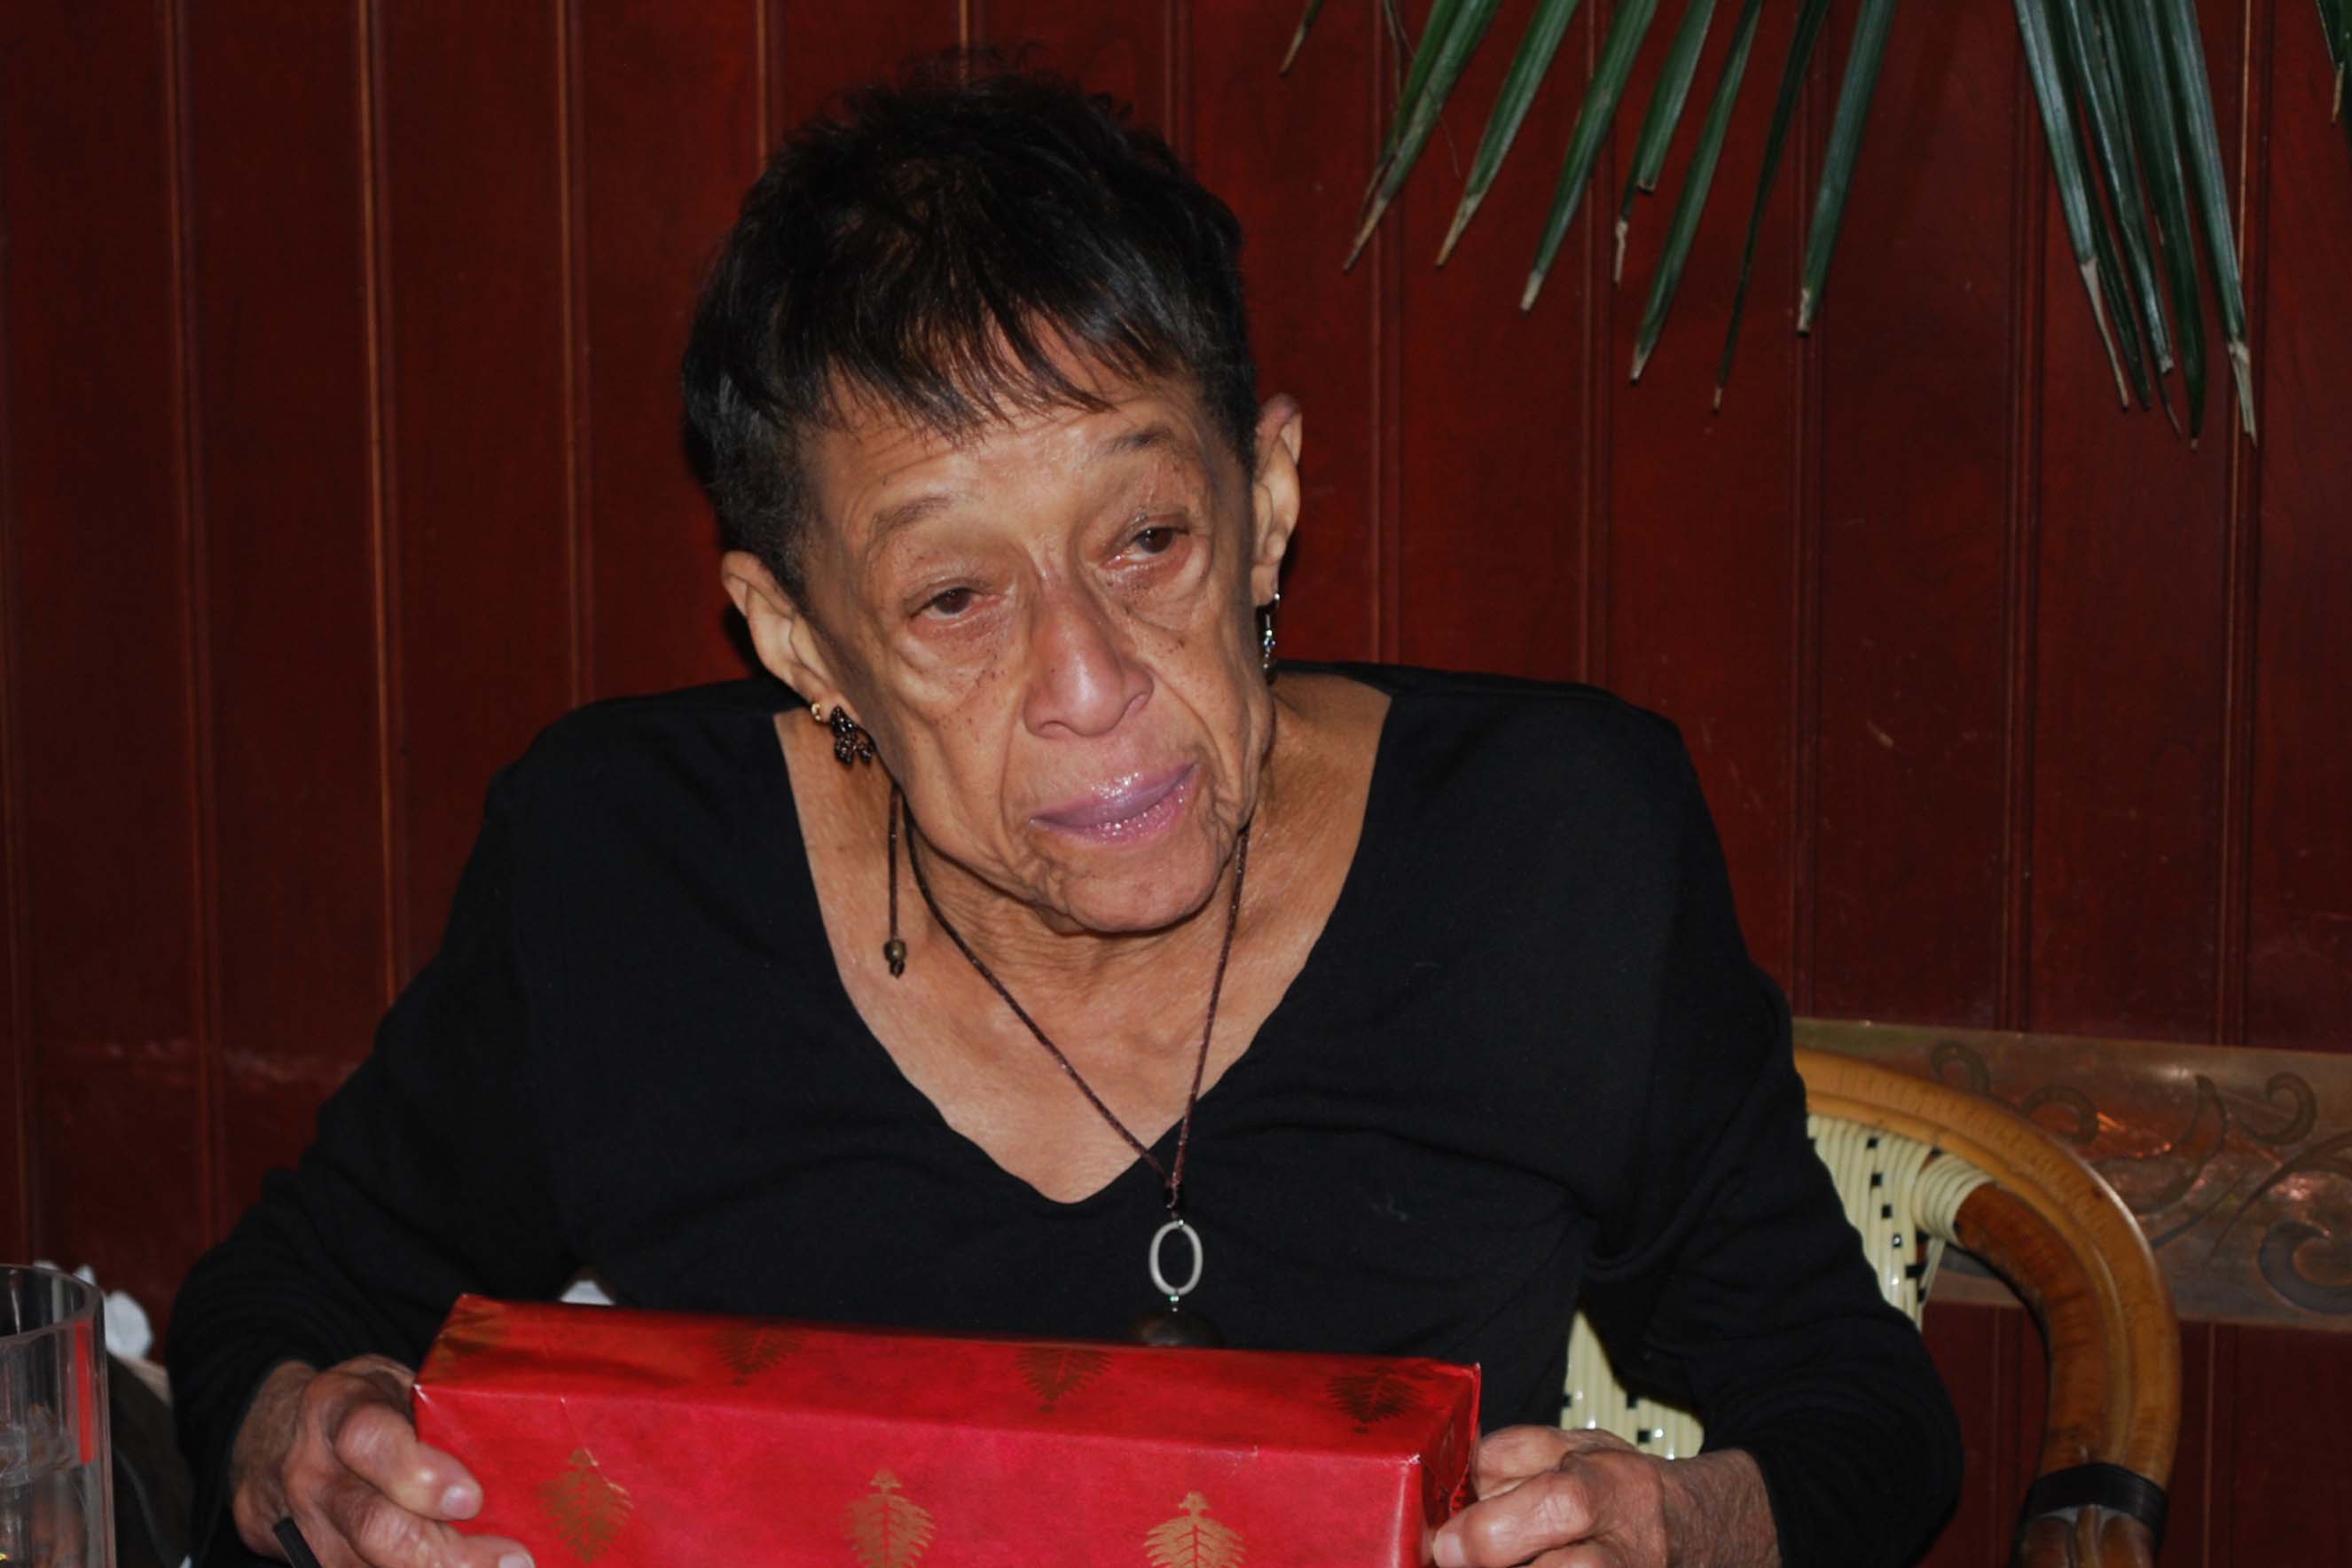 Dobson in 2010 at a Christmas party for the Space Department’s Ocean Remote Sensing Group